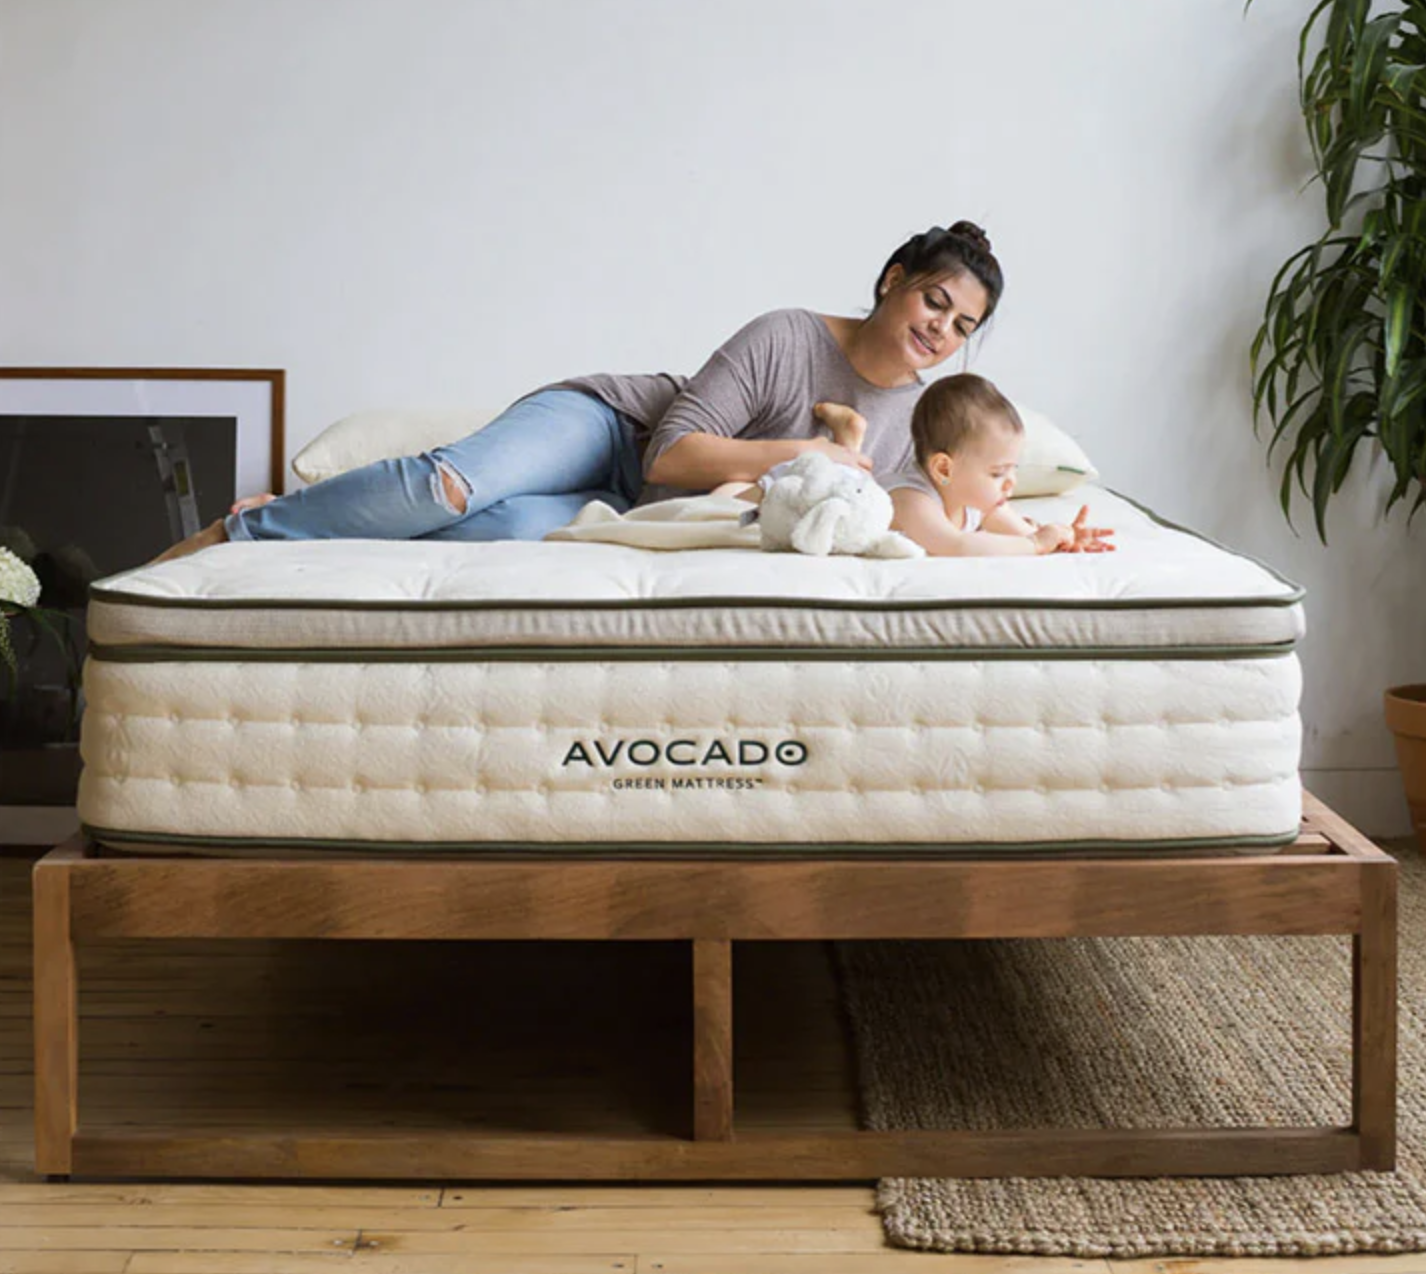 A person and their baby are resting on a mattress